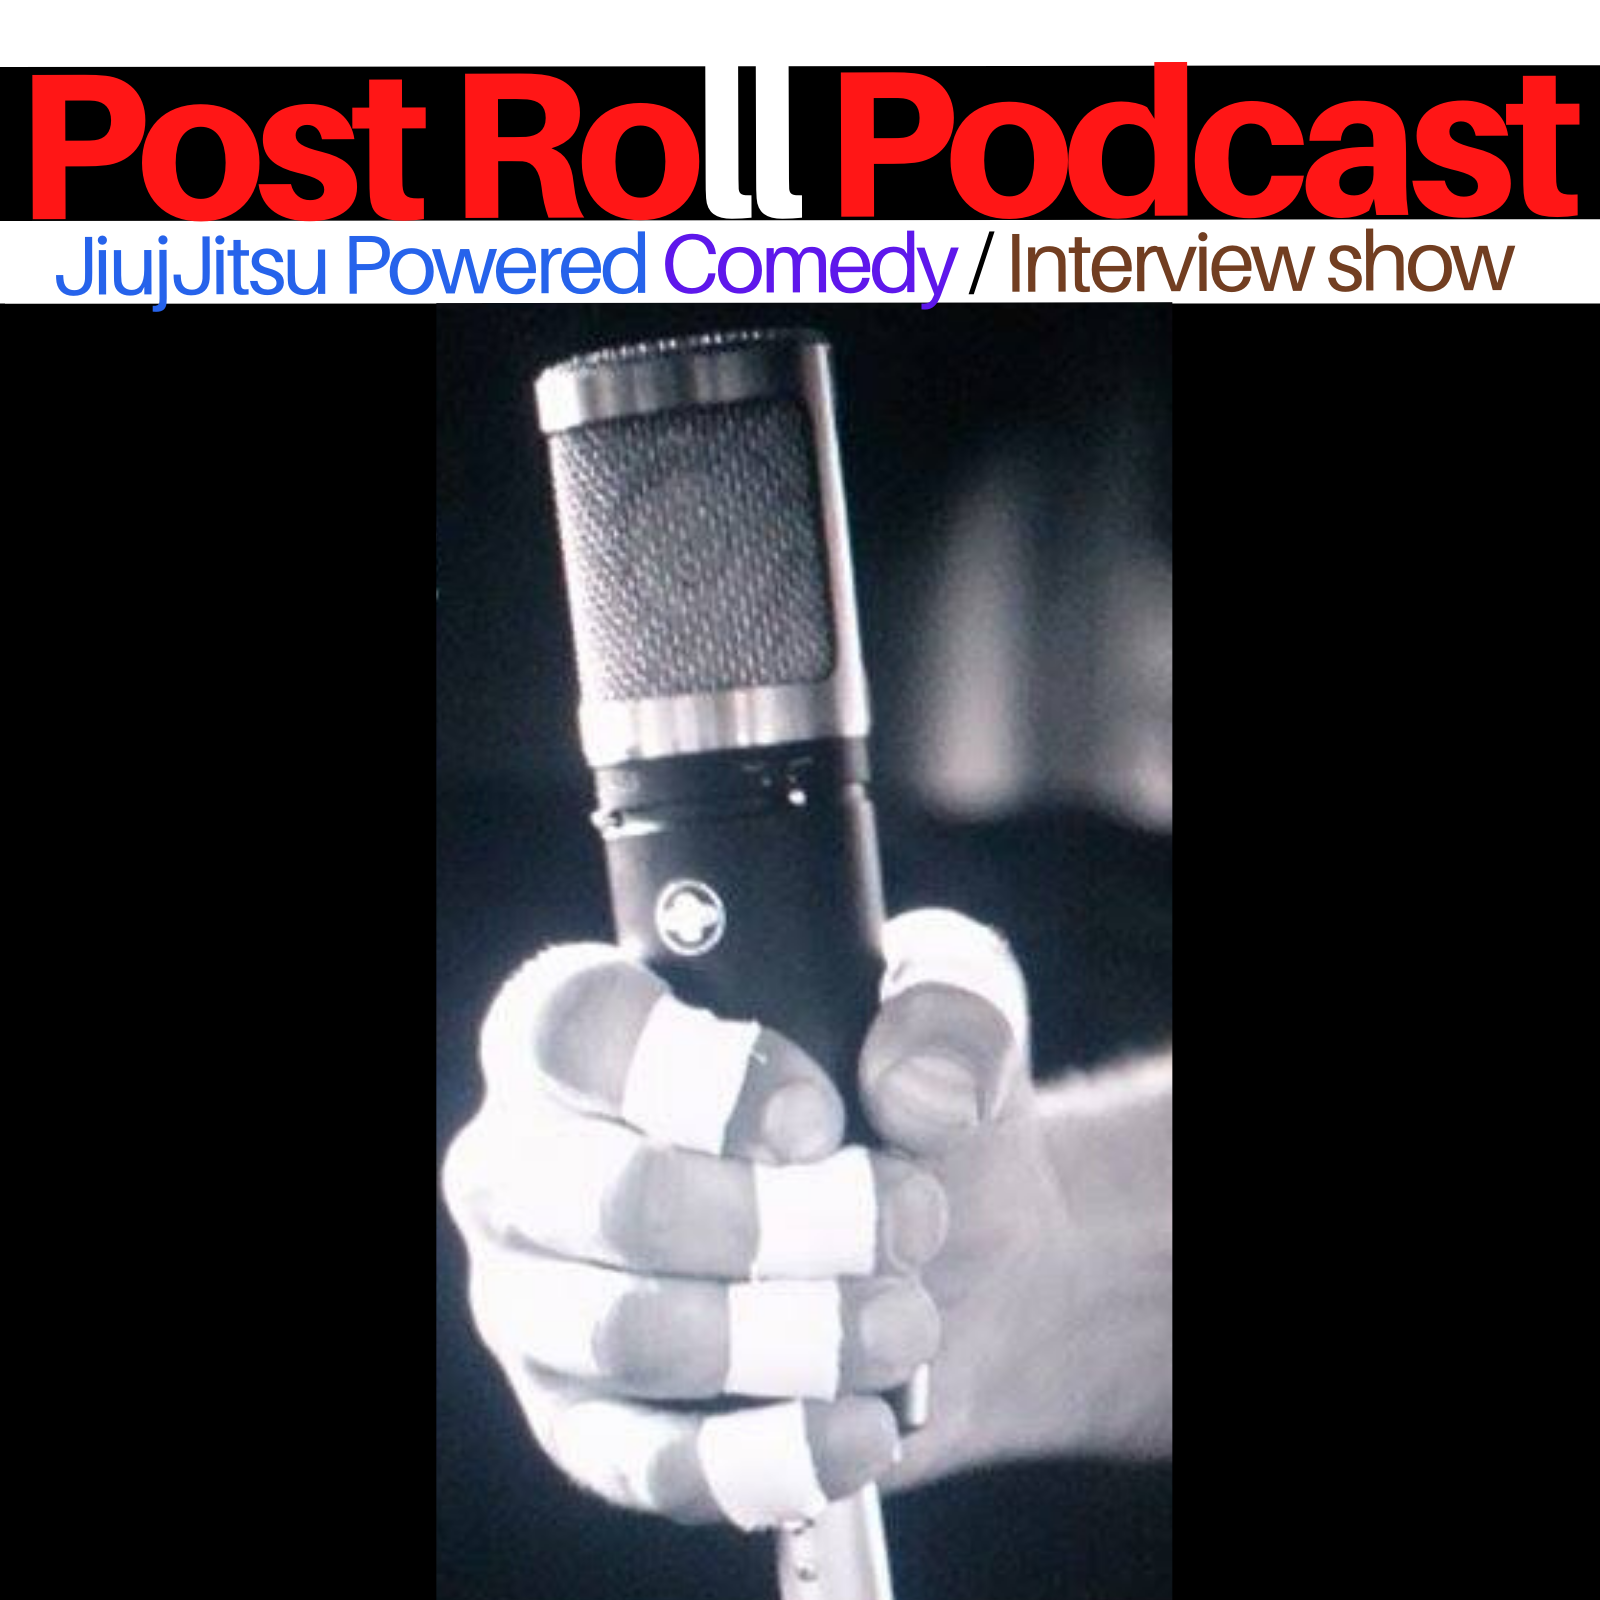 Post Roll Podcast